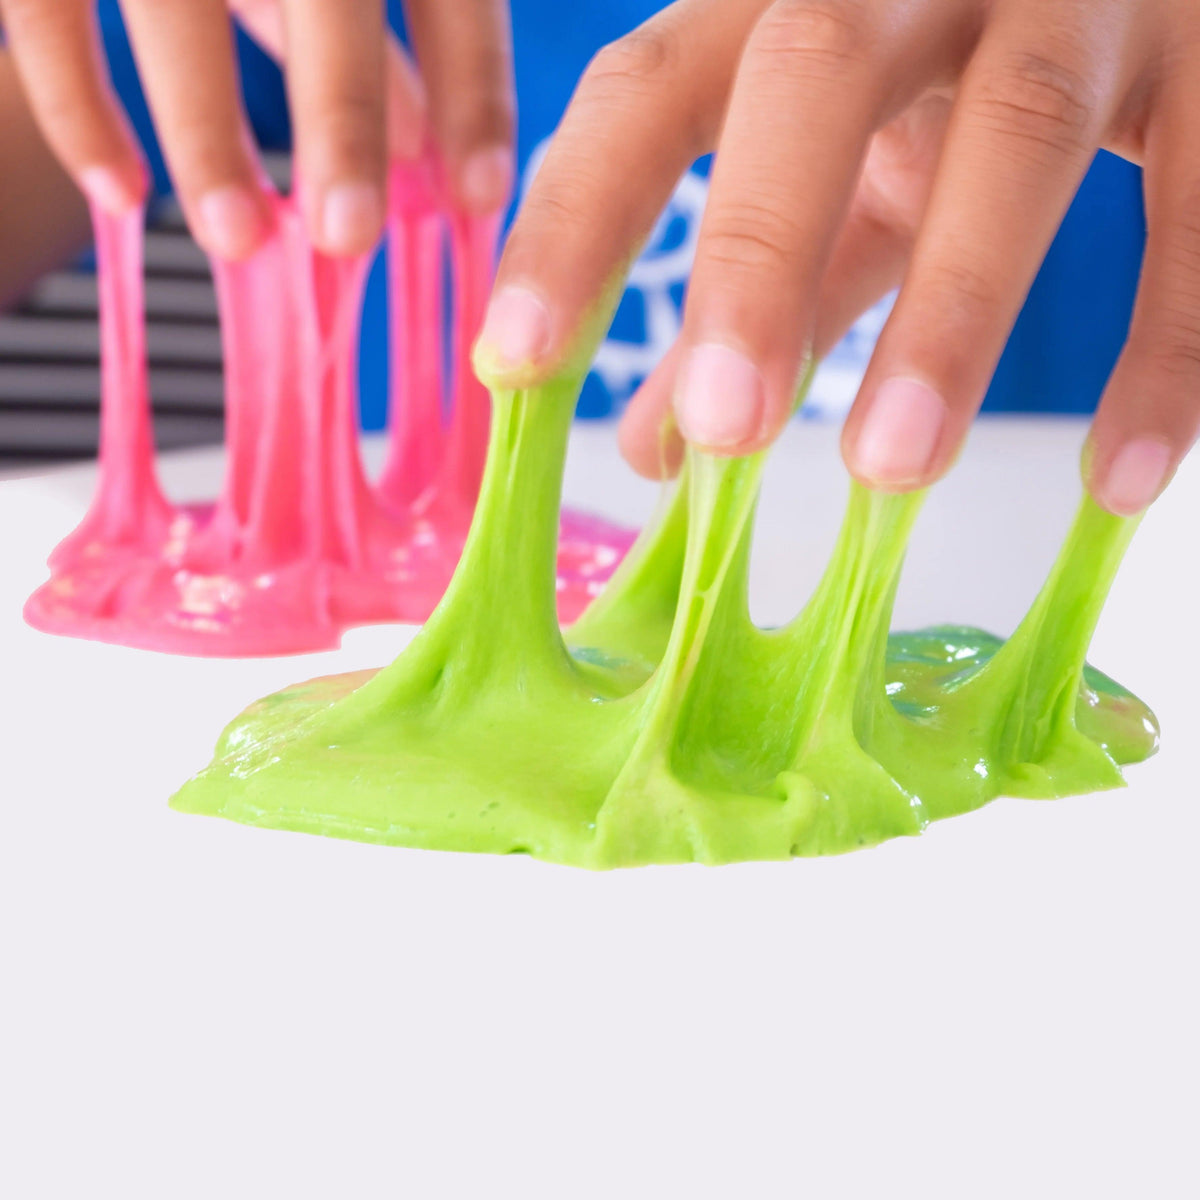 Original Stationery Dinosaur Slime Kit, Glow in The Dark Slime Making Kit  to Create Slime for Boys, Glossy Slime and Dino Poop Slime for Kids,  Awesome 